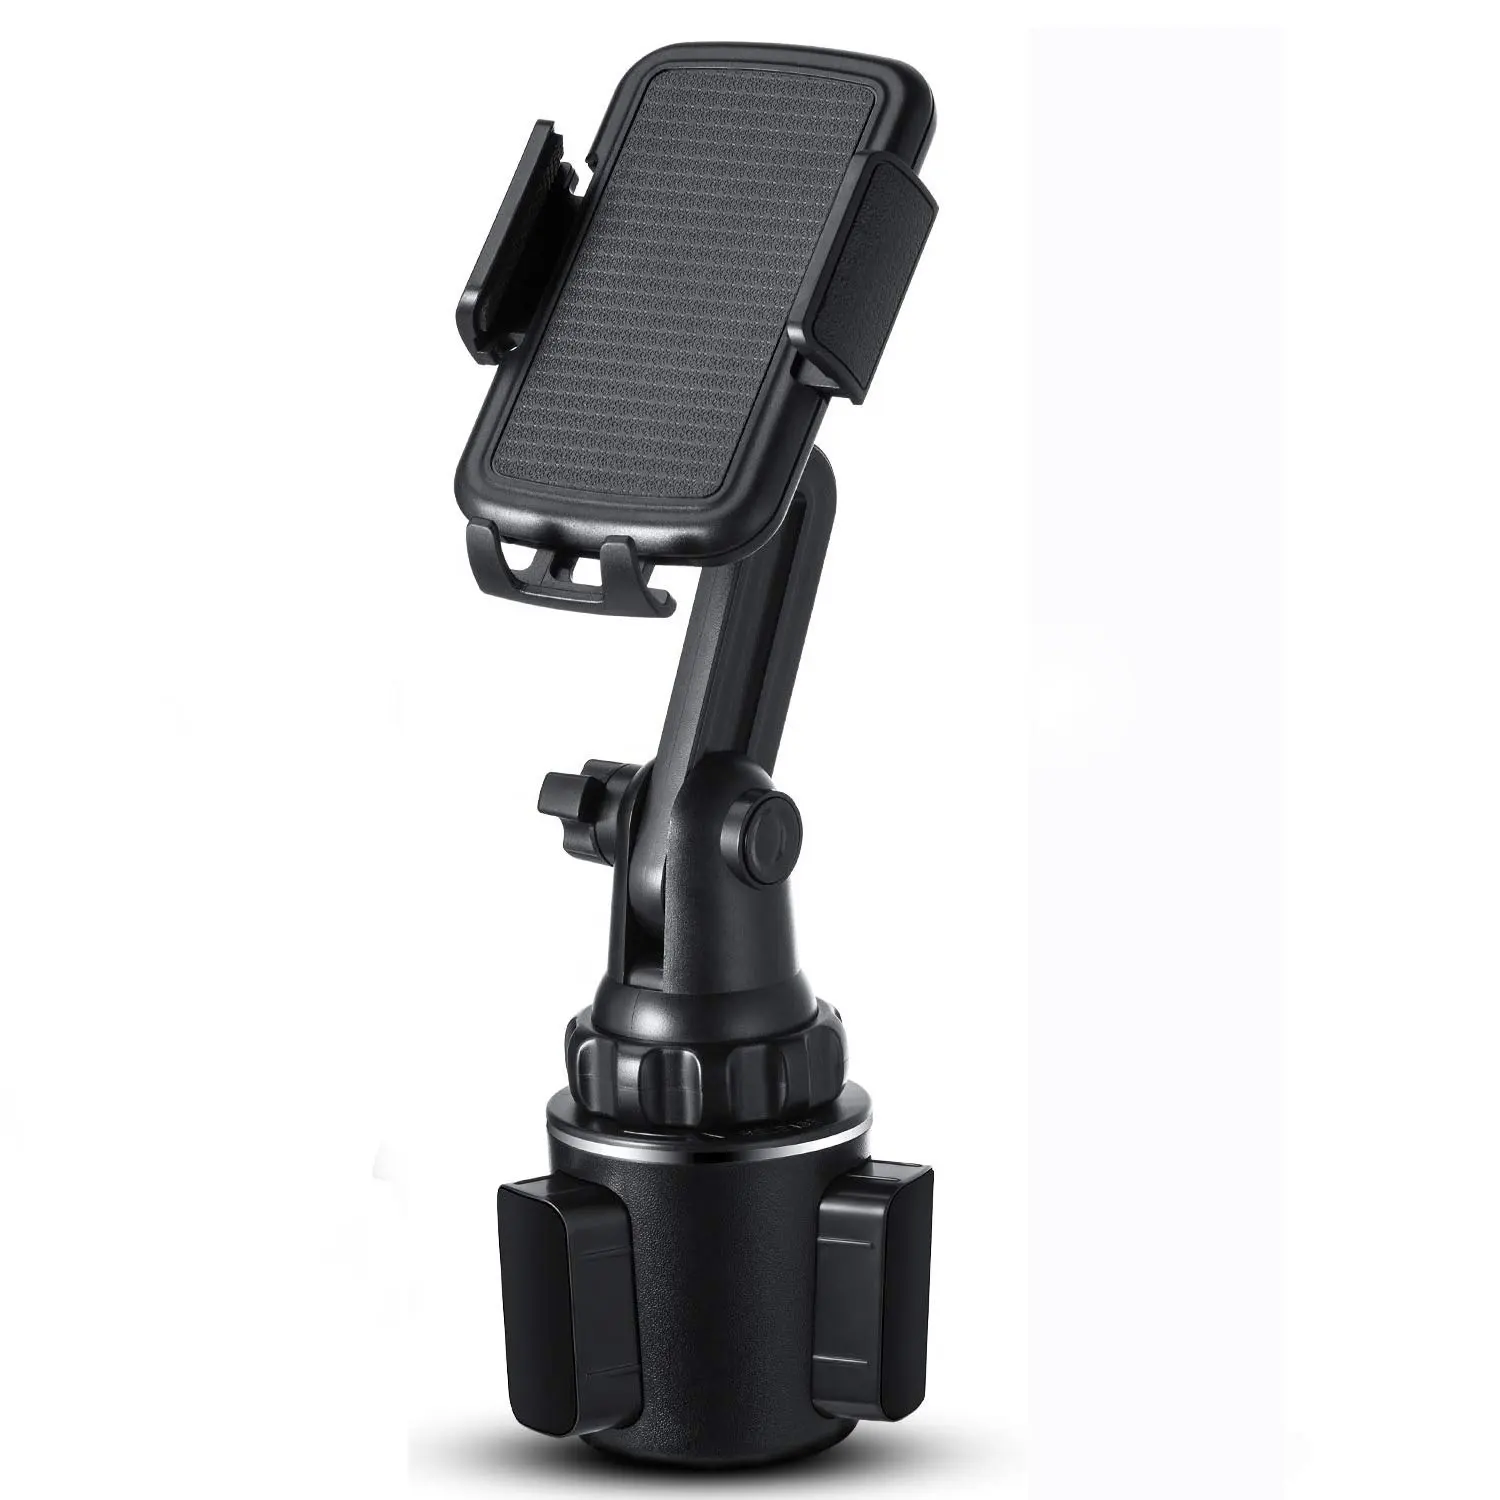 Starsky Cup Phone Holder for Car, Cup Holder Phone Mount for Car Universal of Cellphone